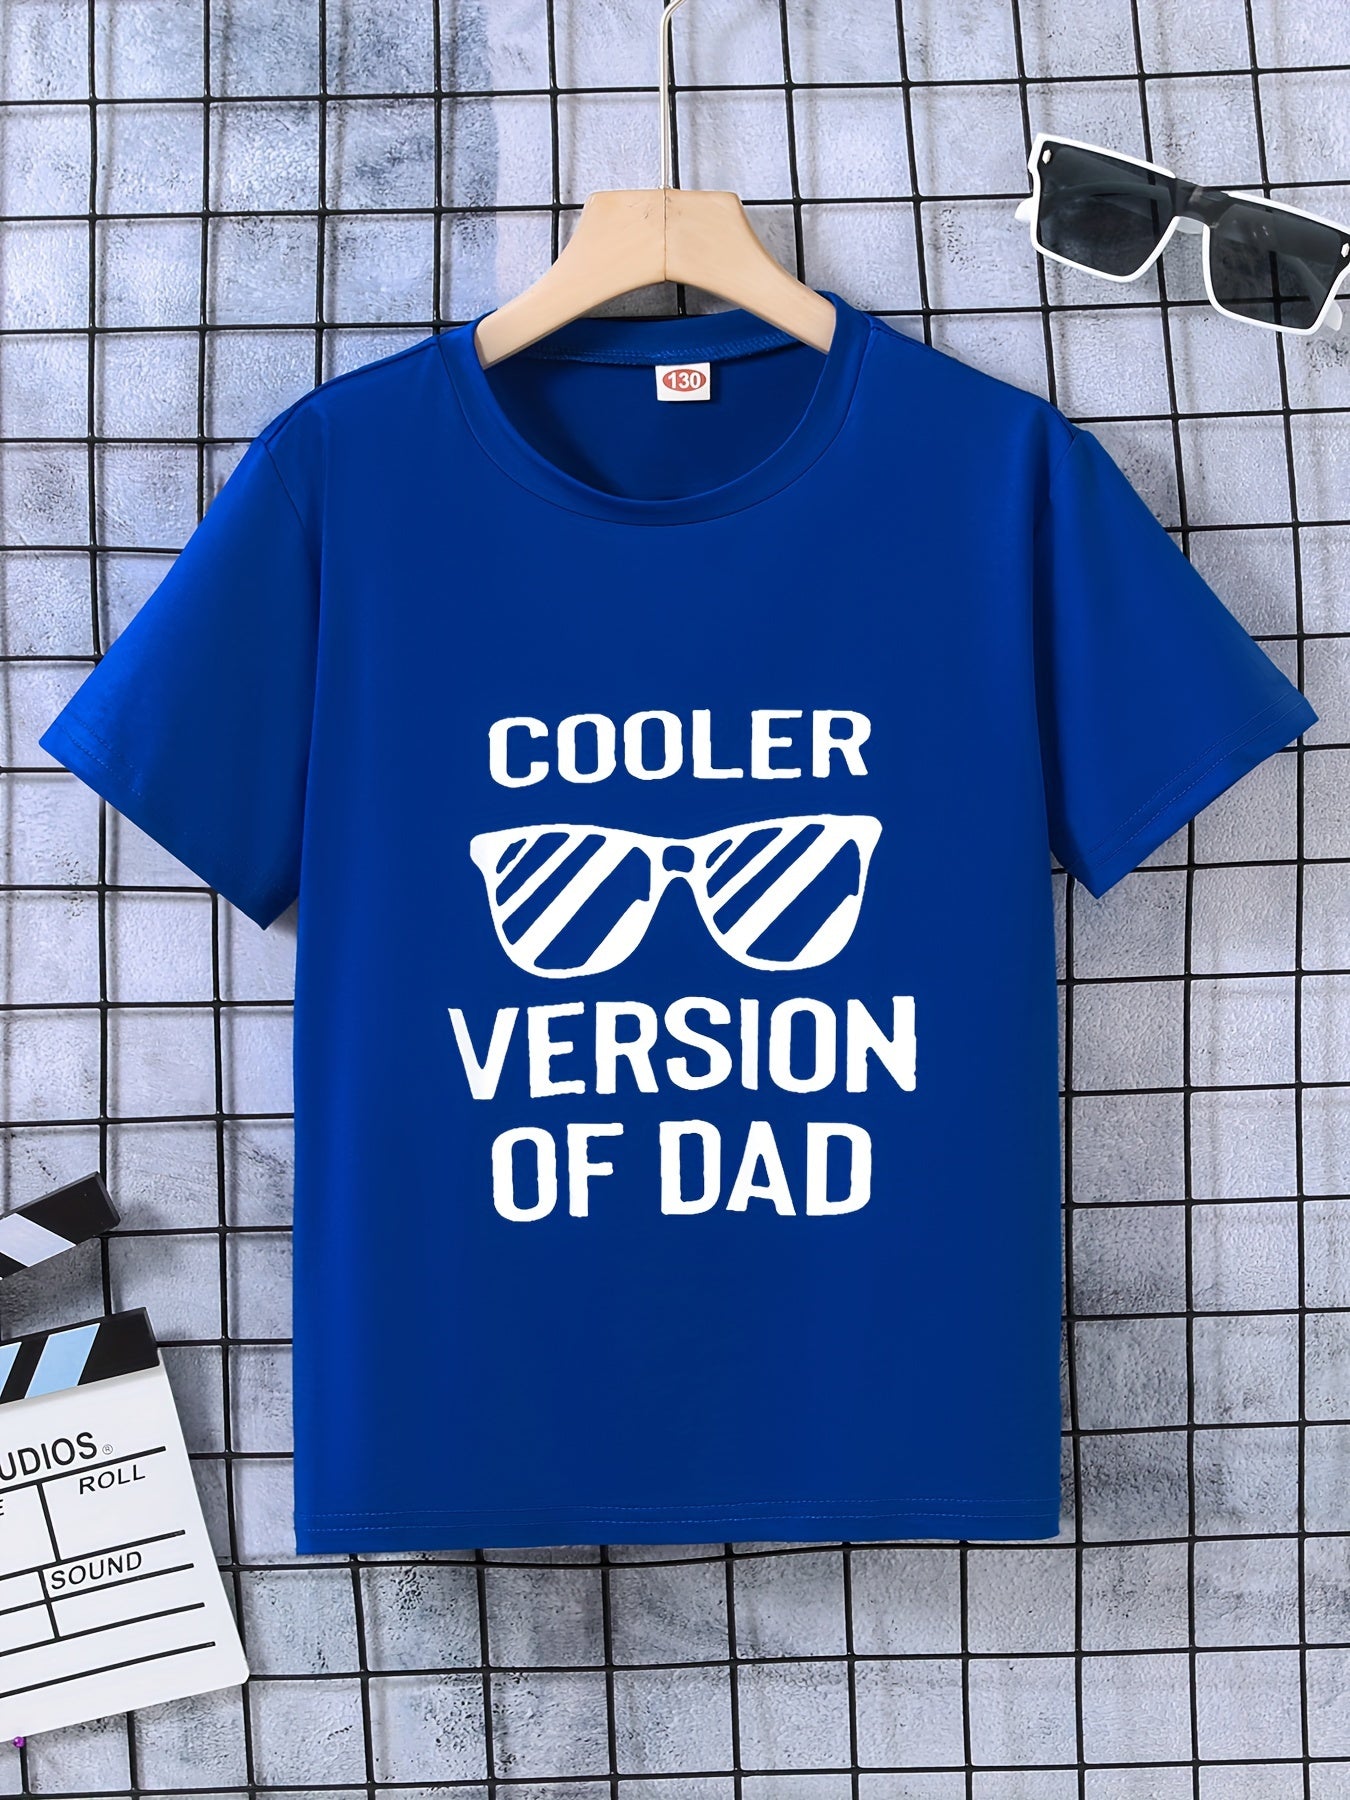 COOLER VERSION OF DAD Letter Print Boys Creative T-shirt, Casual Lightweight Comfy Short Sleeve Tee Tops, Kids Clothes For Summer